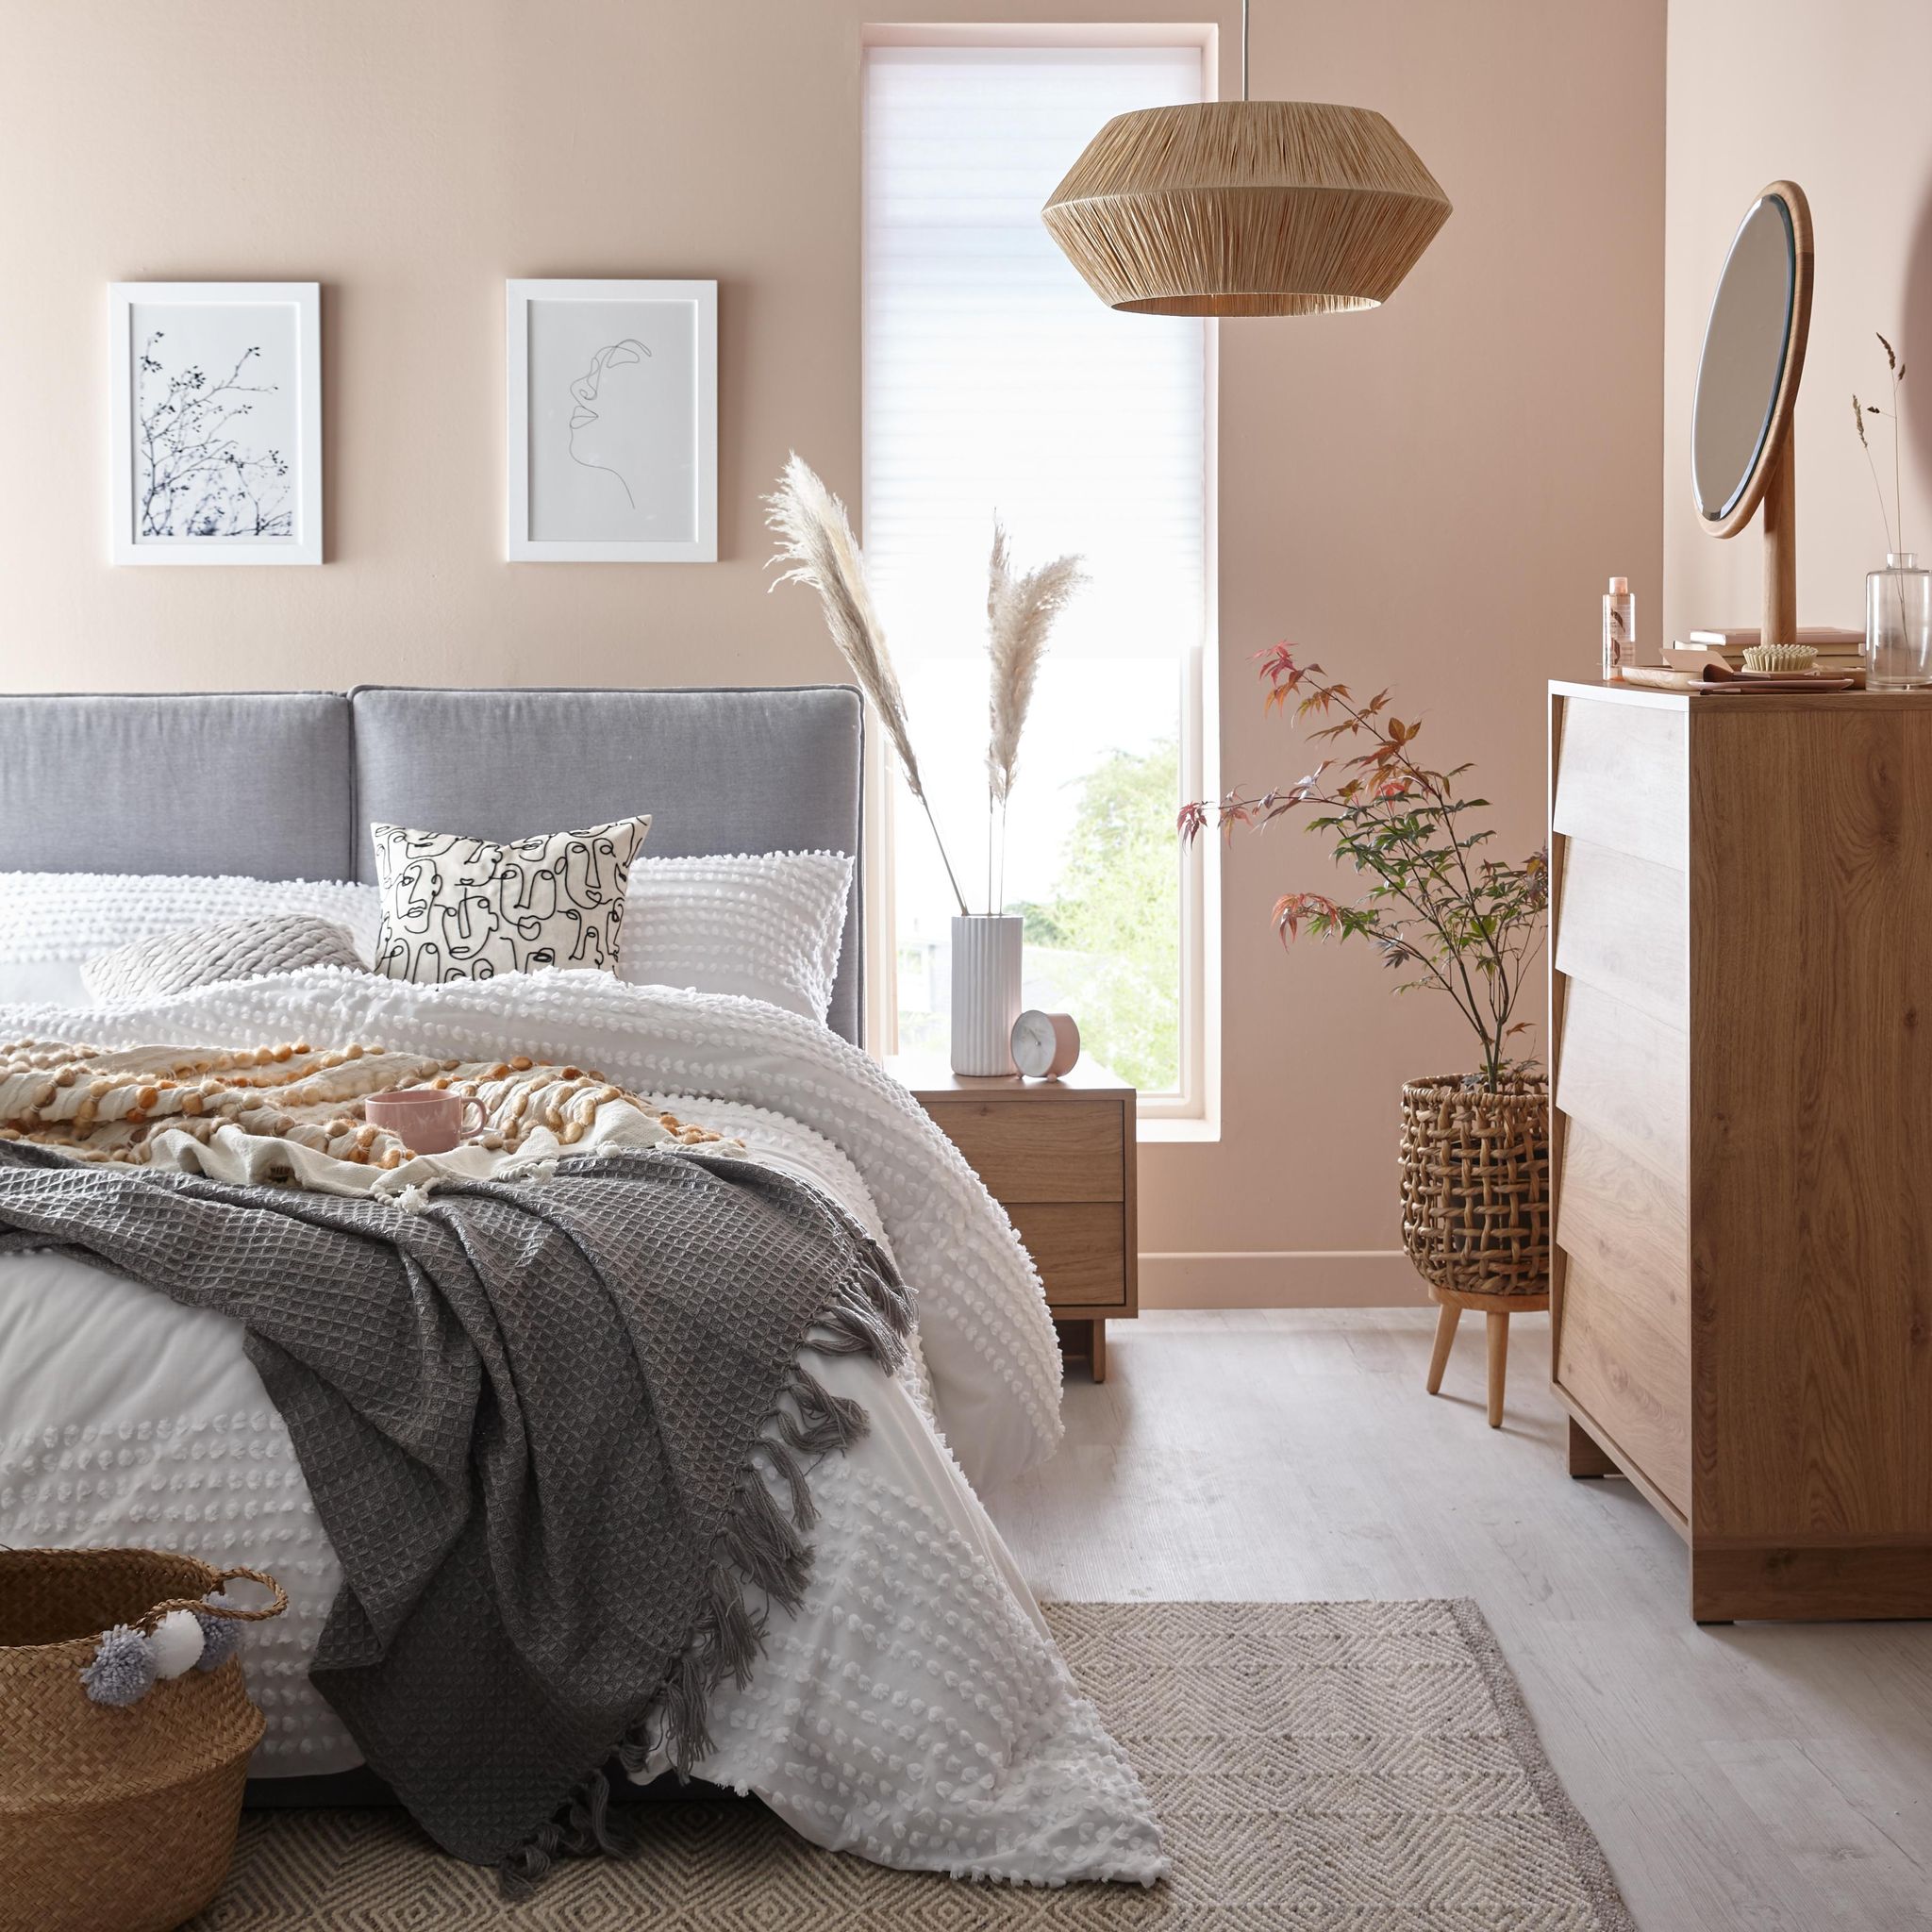 10 inexpensive ways to transform your bedroom for under £50